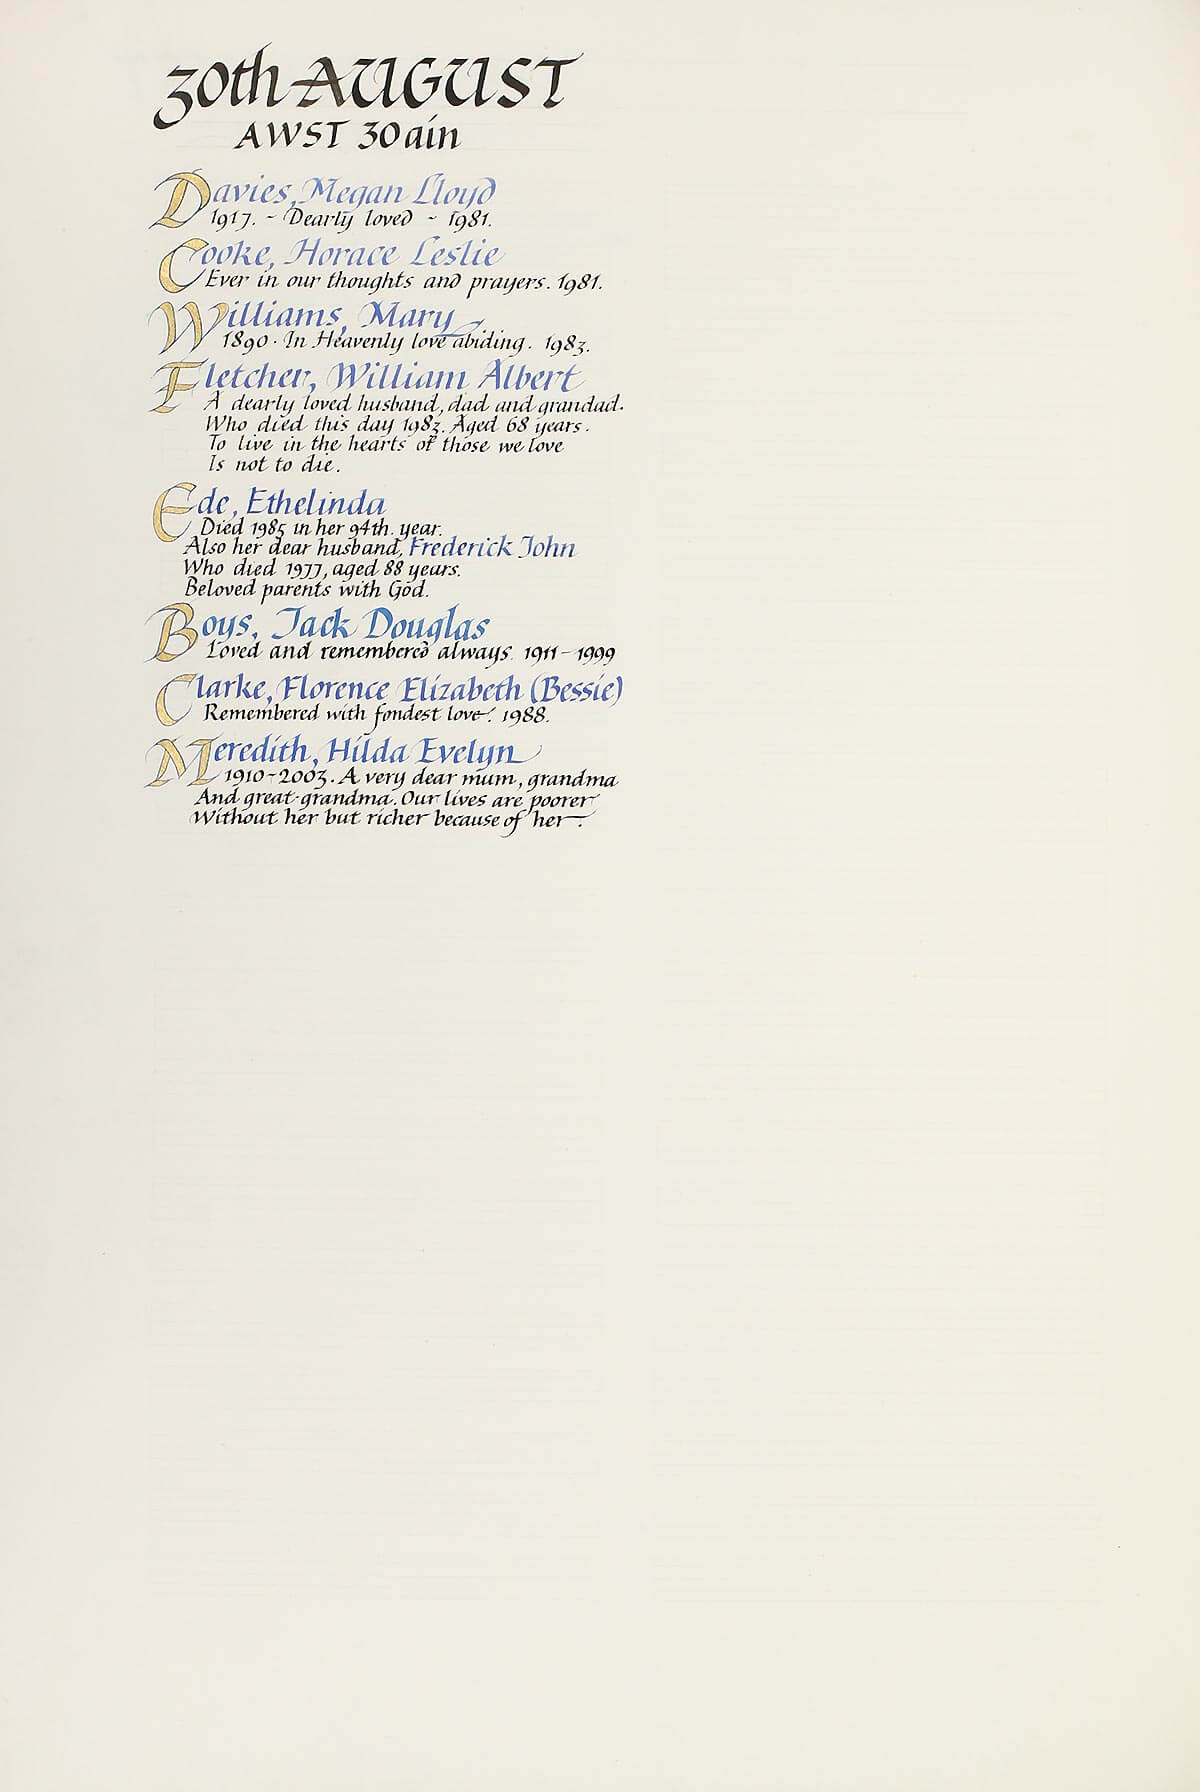 Page from the Book of Remembrance